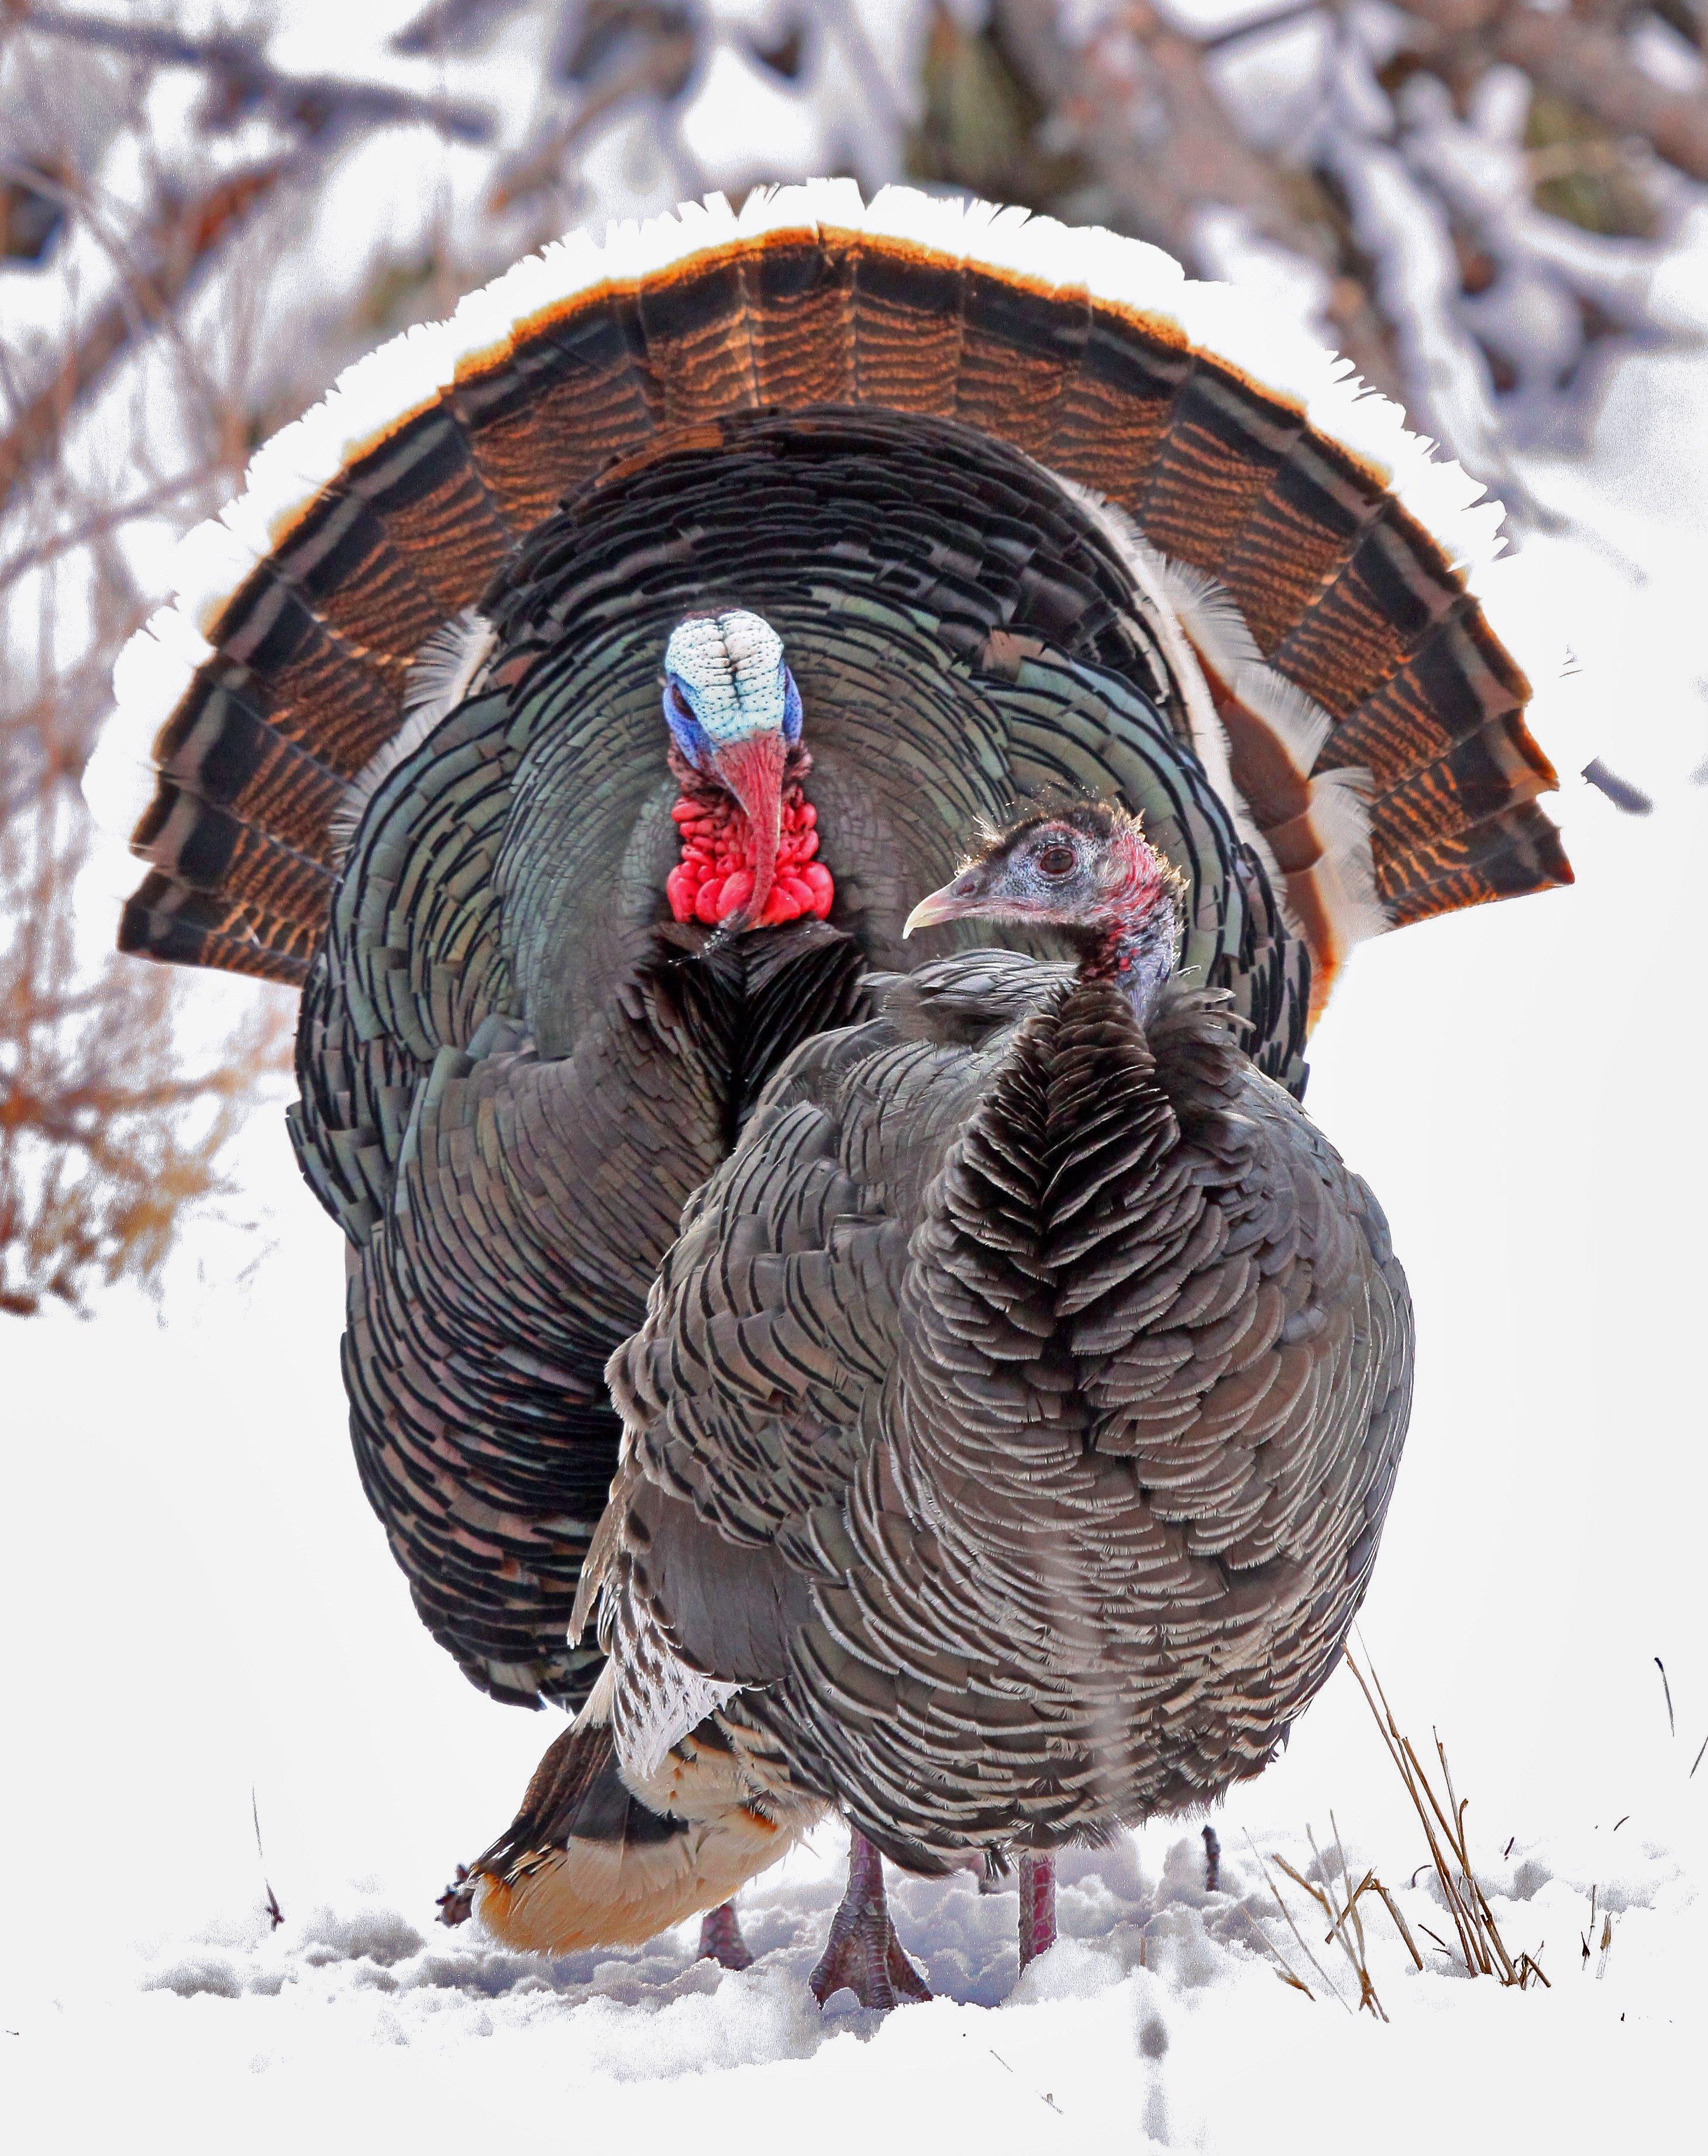 As spring draws near, wild turkeys begin to focus less on food and more on the upcoming breeding season.